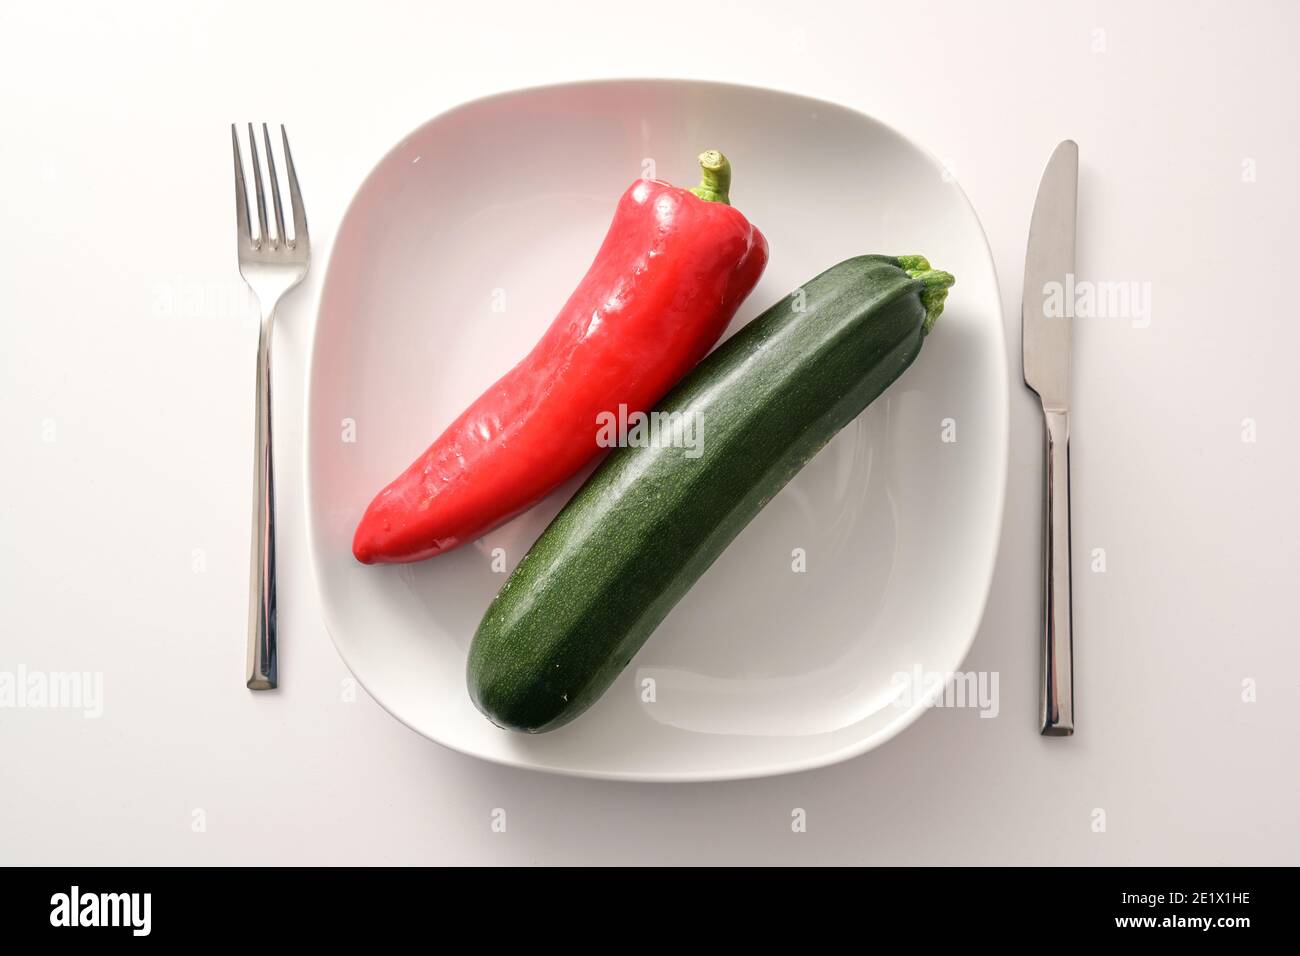 Raw red pointed pepper and zucchini on a white plate and cutlery on a bright background, healthy diet with mediterranean vegetables to lose weight in Stock Photo